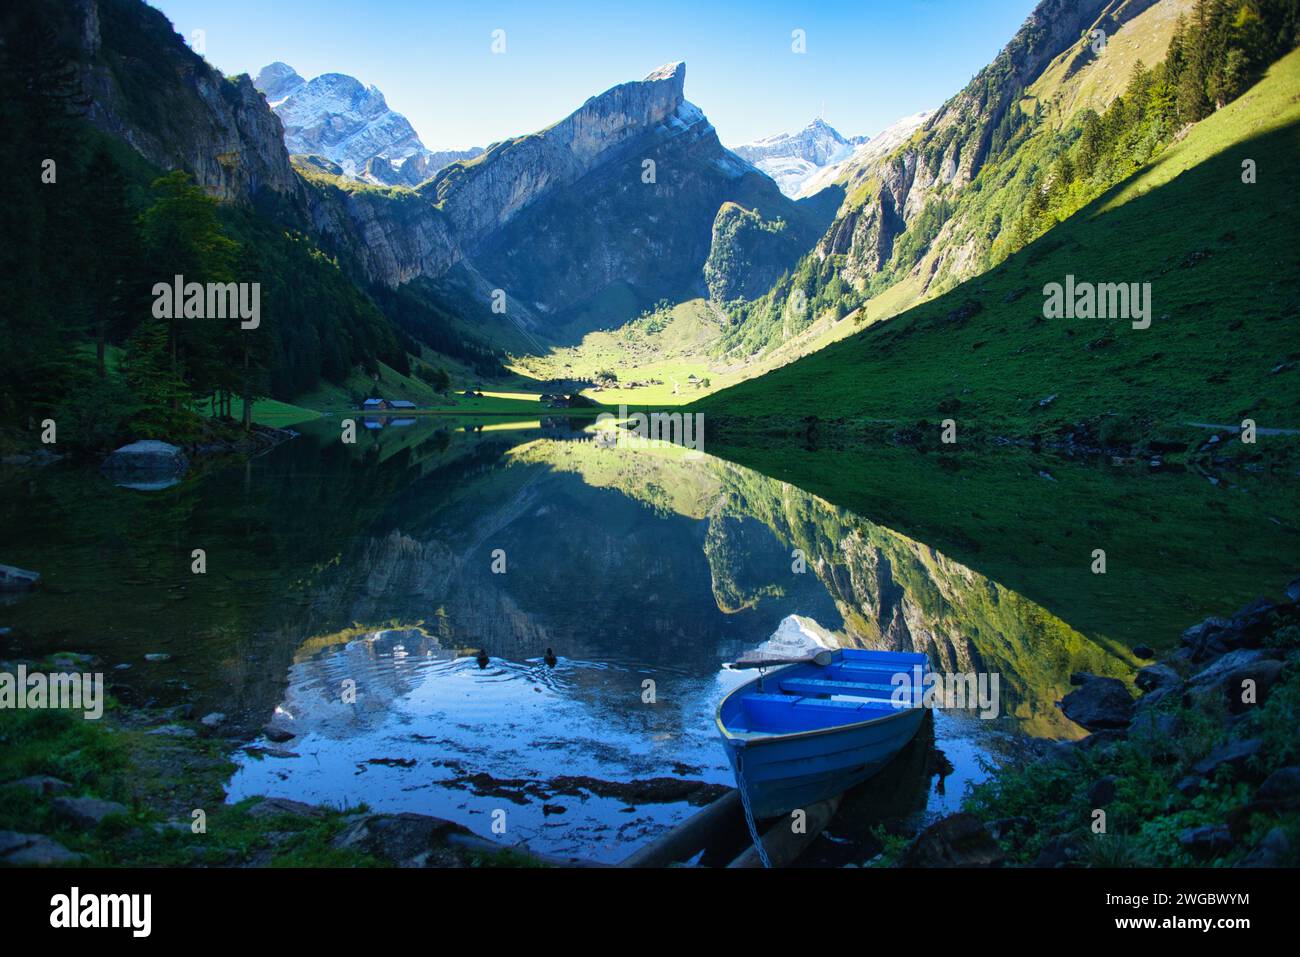 Boat moored in Seealpsee with mountain reflections in lake, Appenzell Innerrhoden, Switzerland Stock Photo